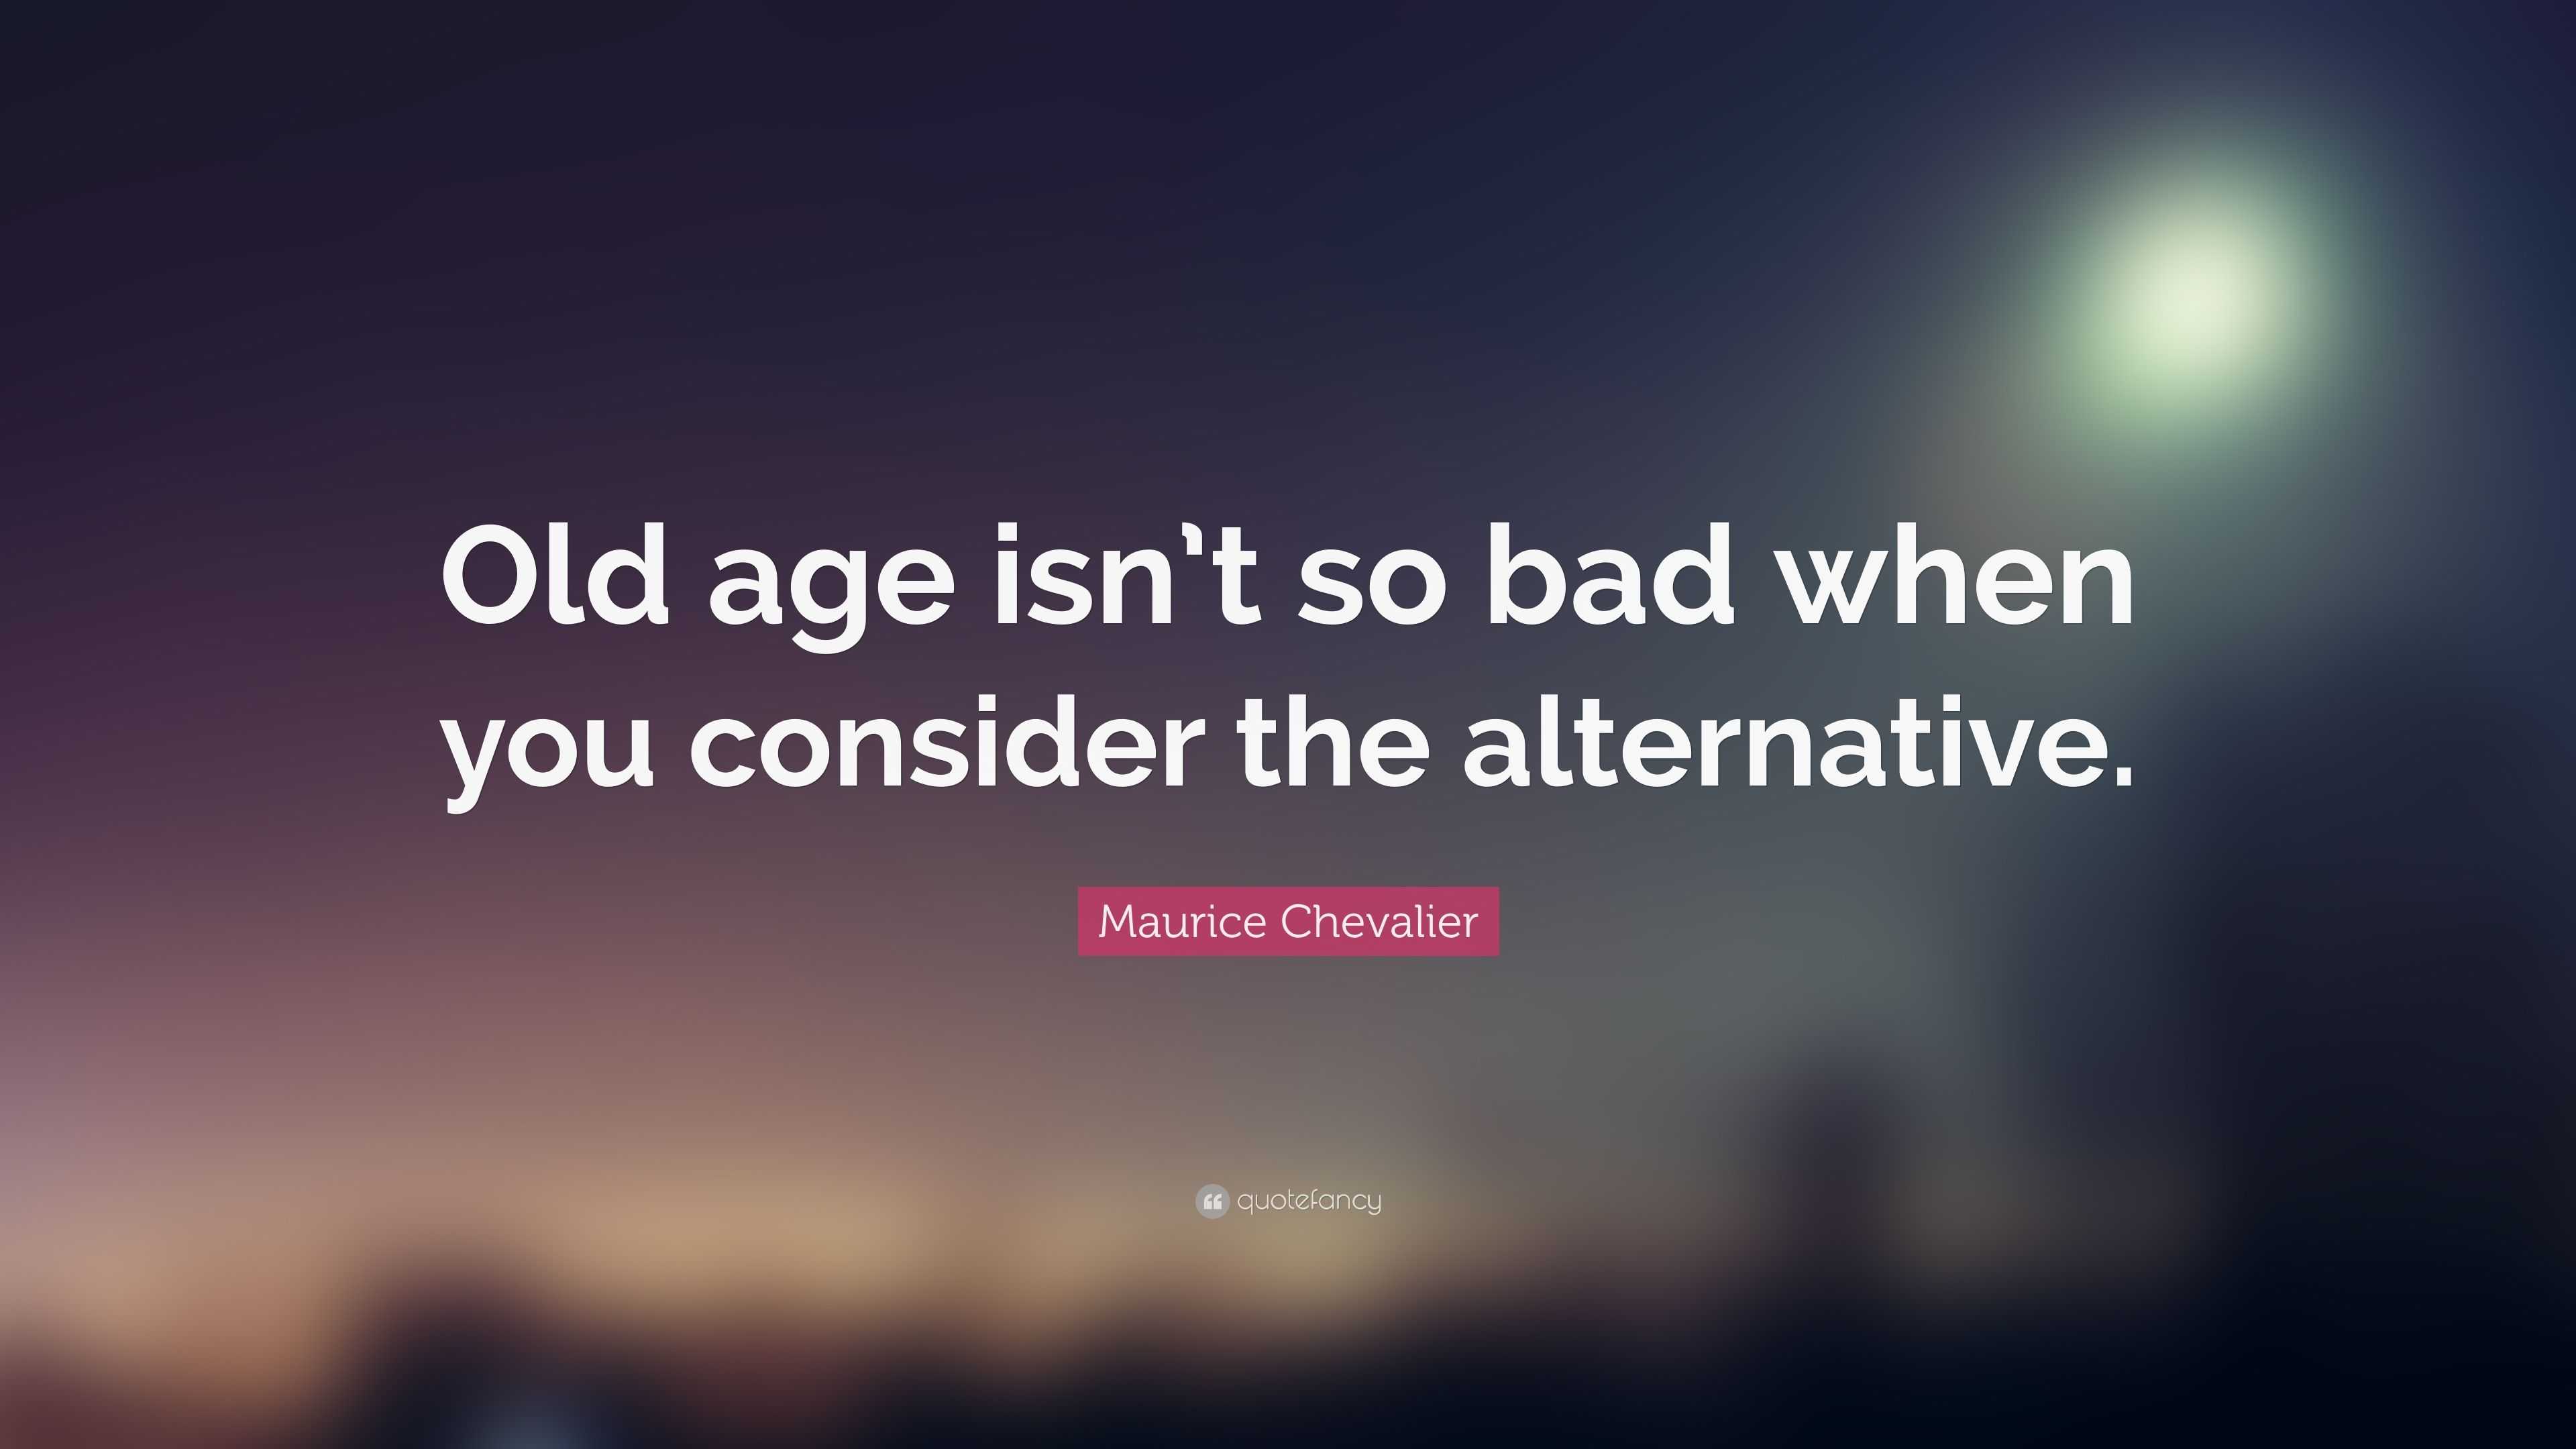 Maurice Chevalier Quote: “Old age isn’t so bad when you consider the ...